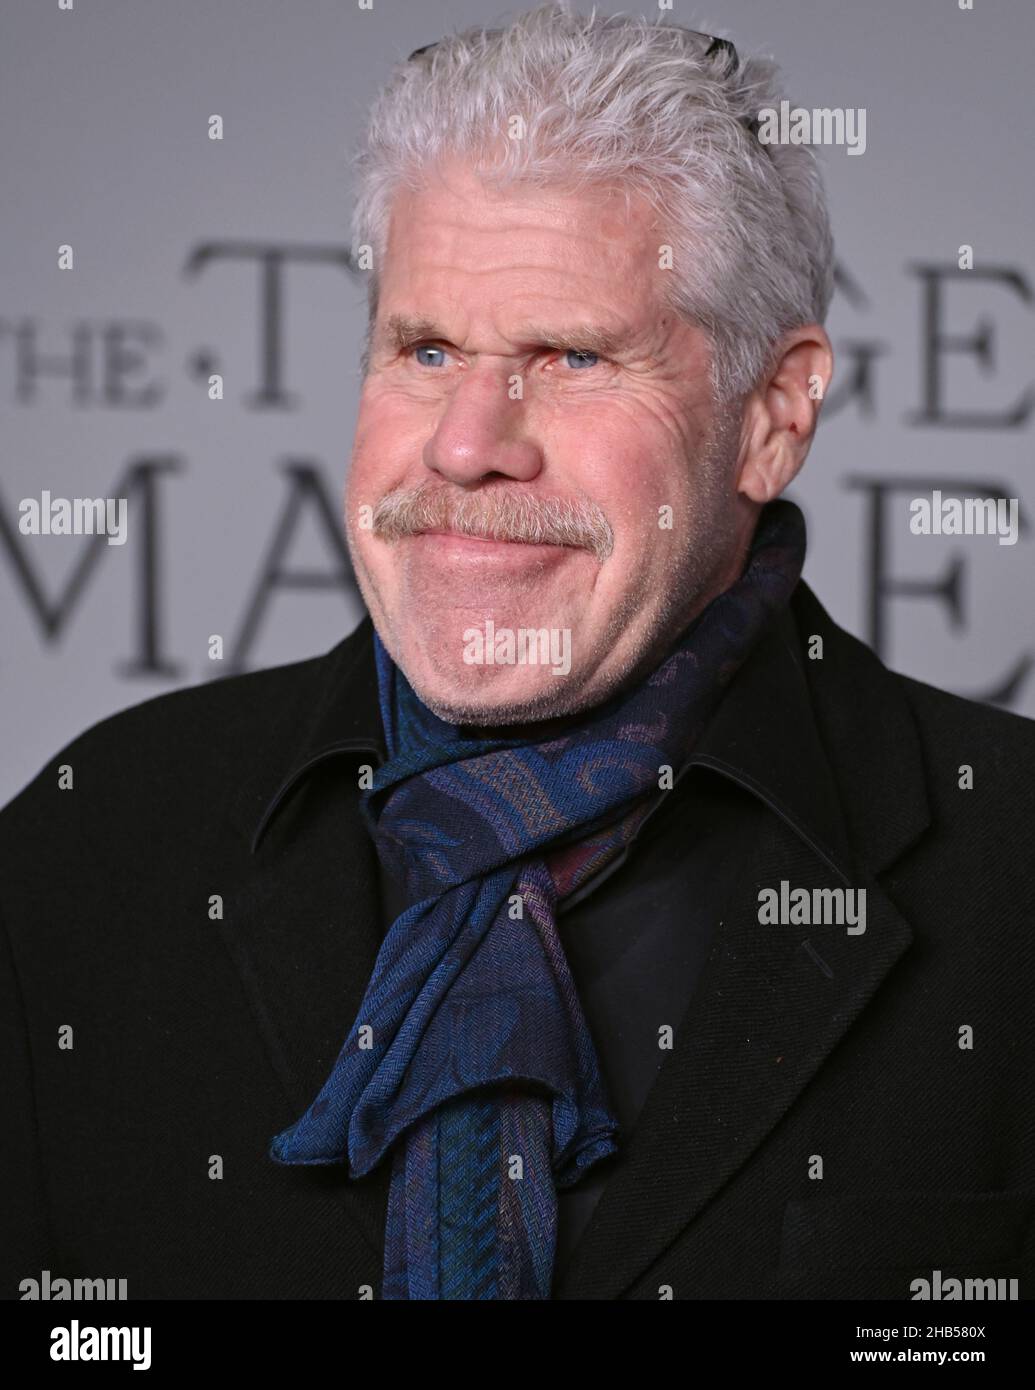 Los Angeles, USA. 16th Dec, 2021. LOS ANGELES, USA. December 16, 2021: Ron Perlman at the premiere of 'The Tragedy of Macbeth' at the Directors Guild of America Theatre. Picture Credit: Paul Smith/Alamy Live News Stock Photo